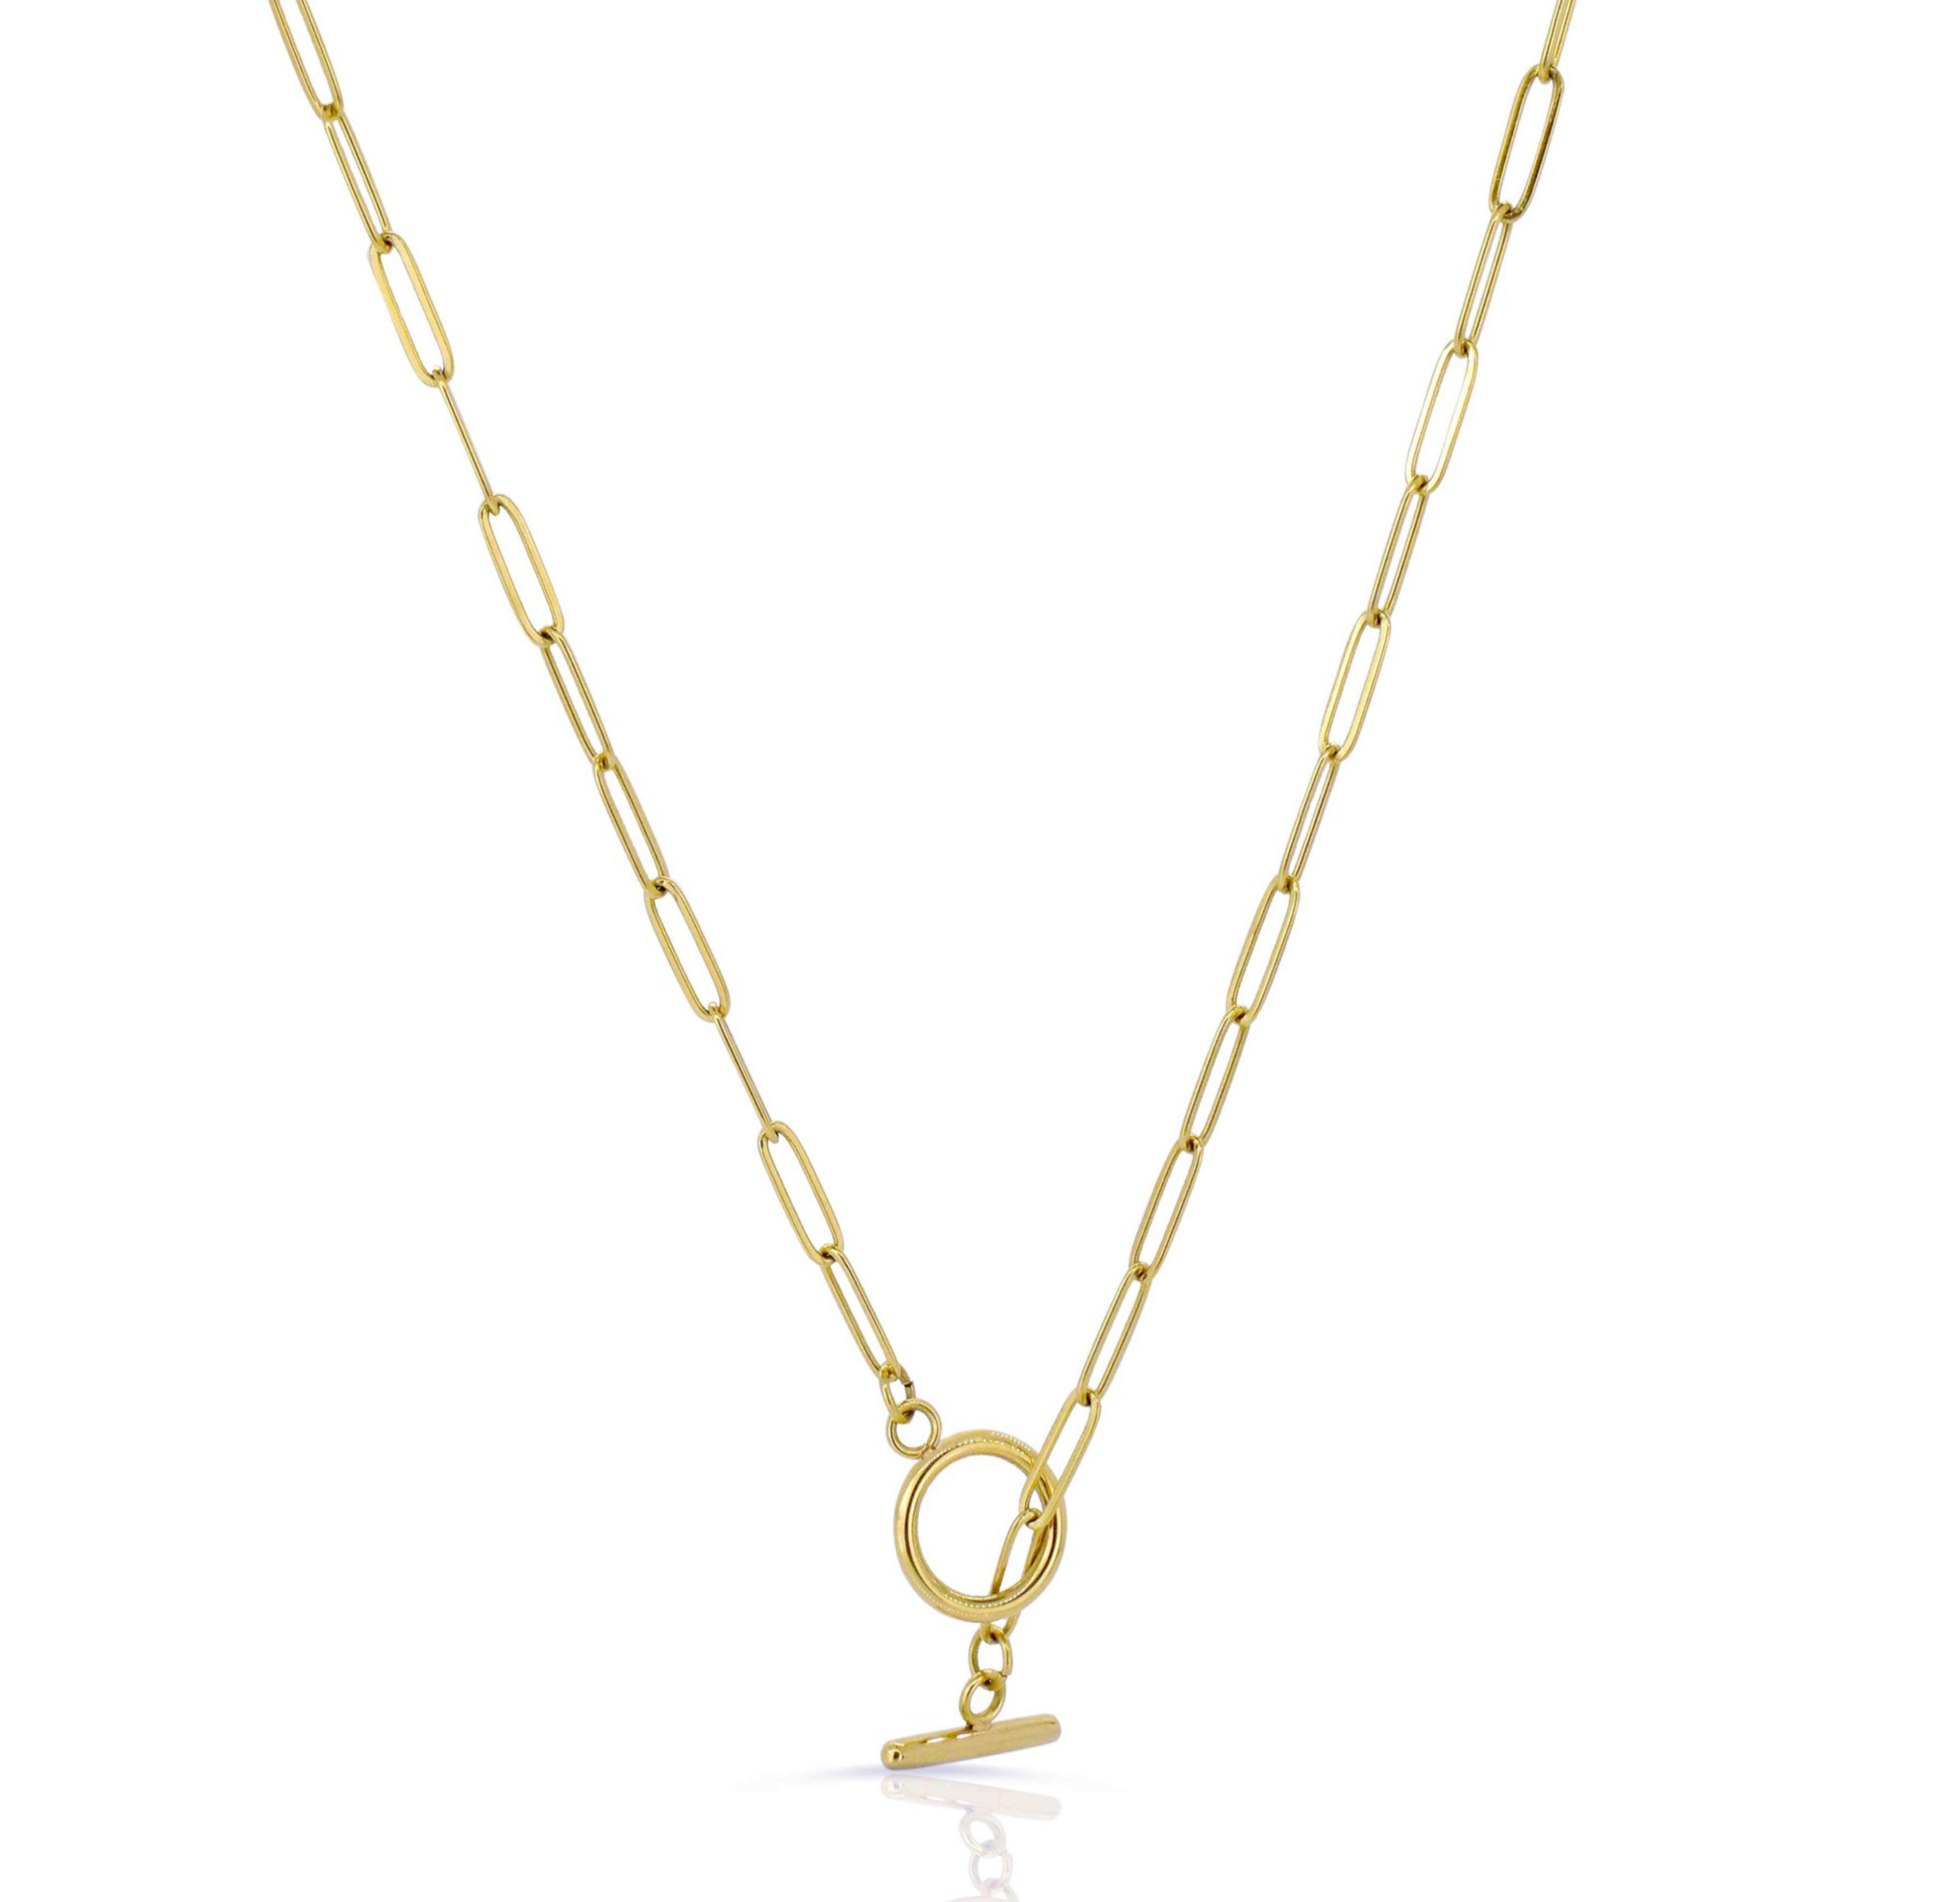 Amiee Gold Heart Toggle Chain Necklace - Waterproof Jewelry